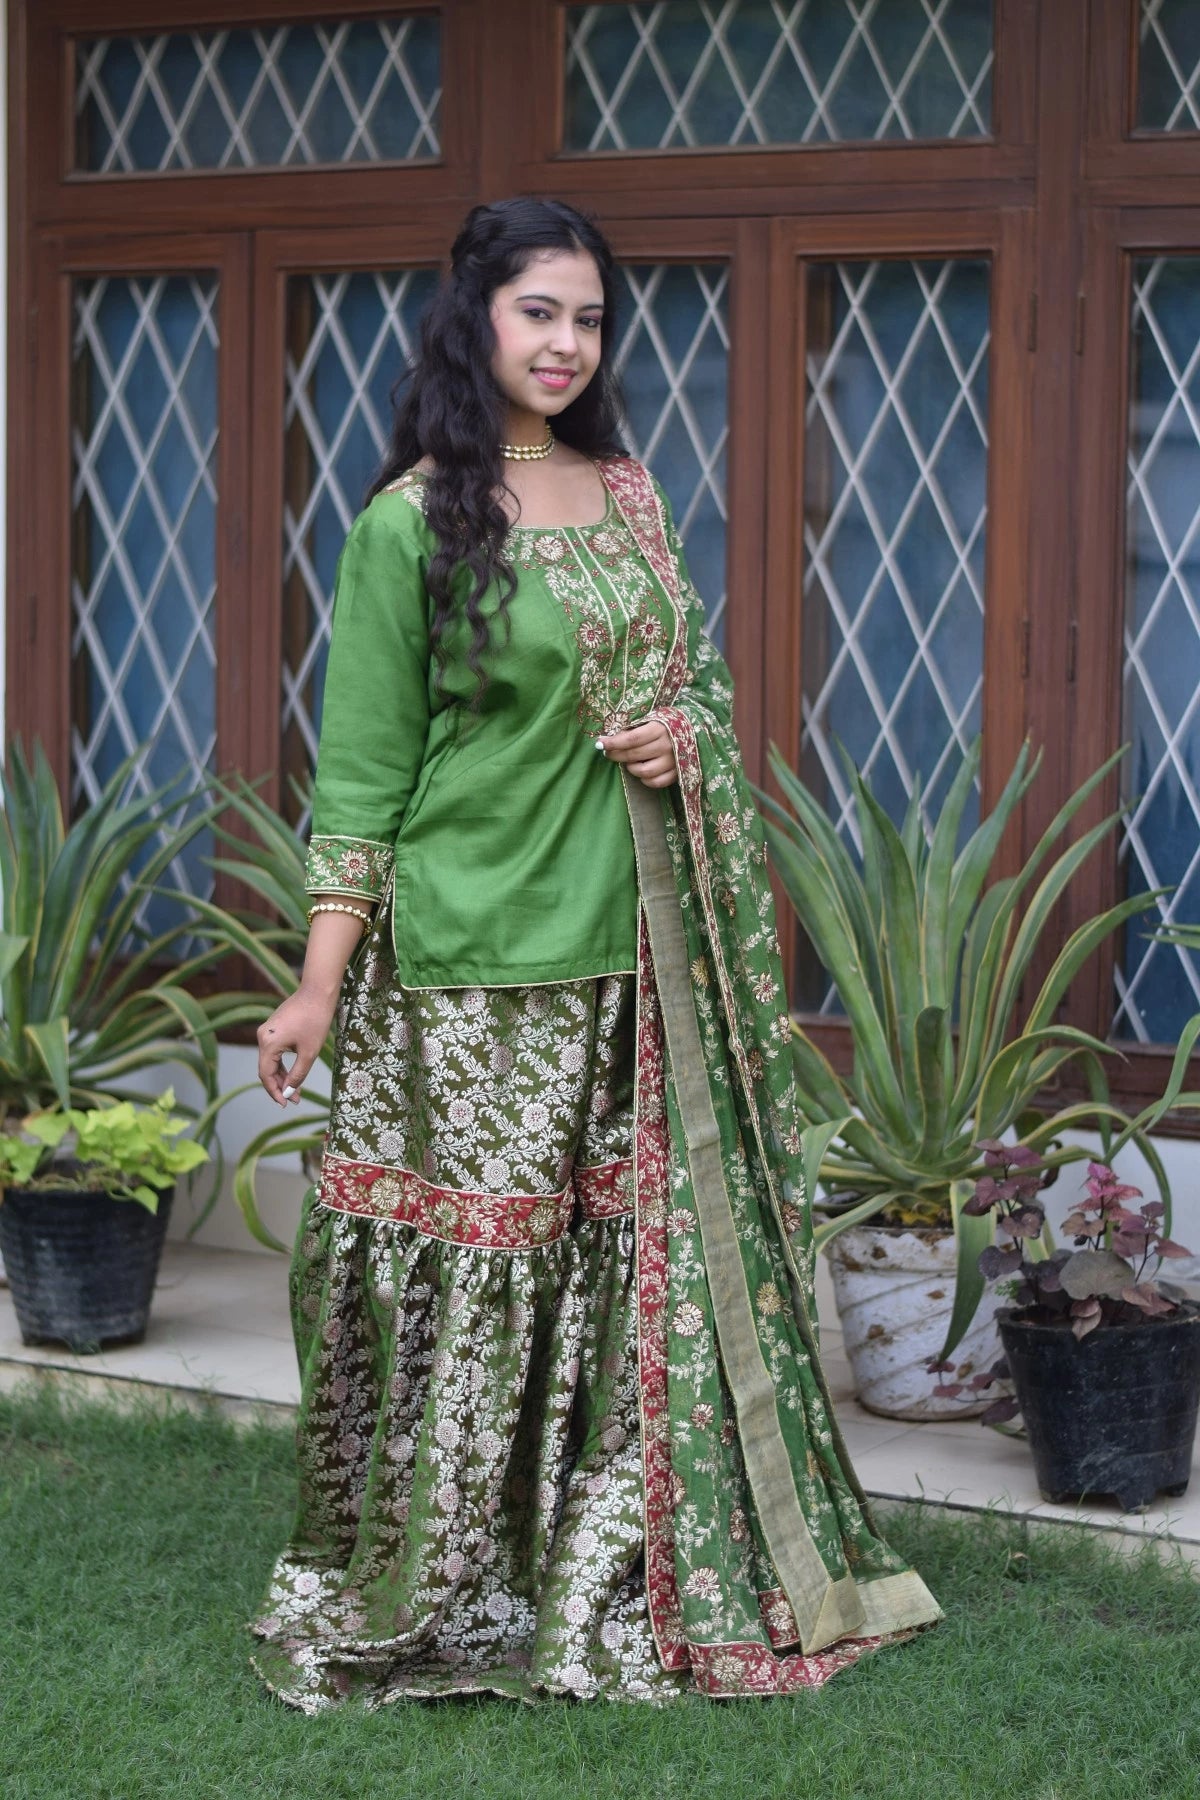 A bride dressed in a gorgeous green silk and kamkhab zardozi embroidery ensemble.